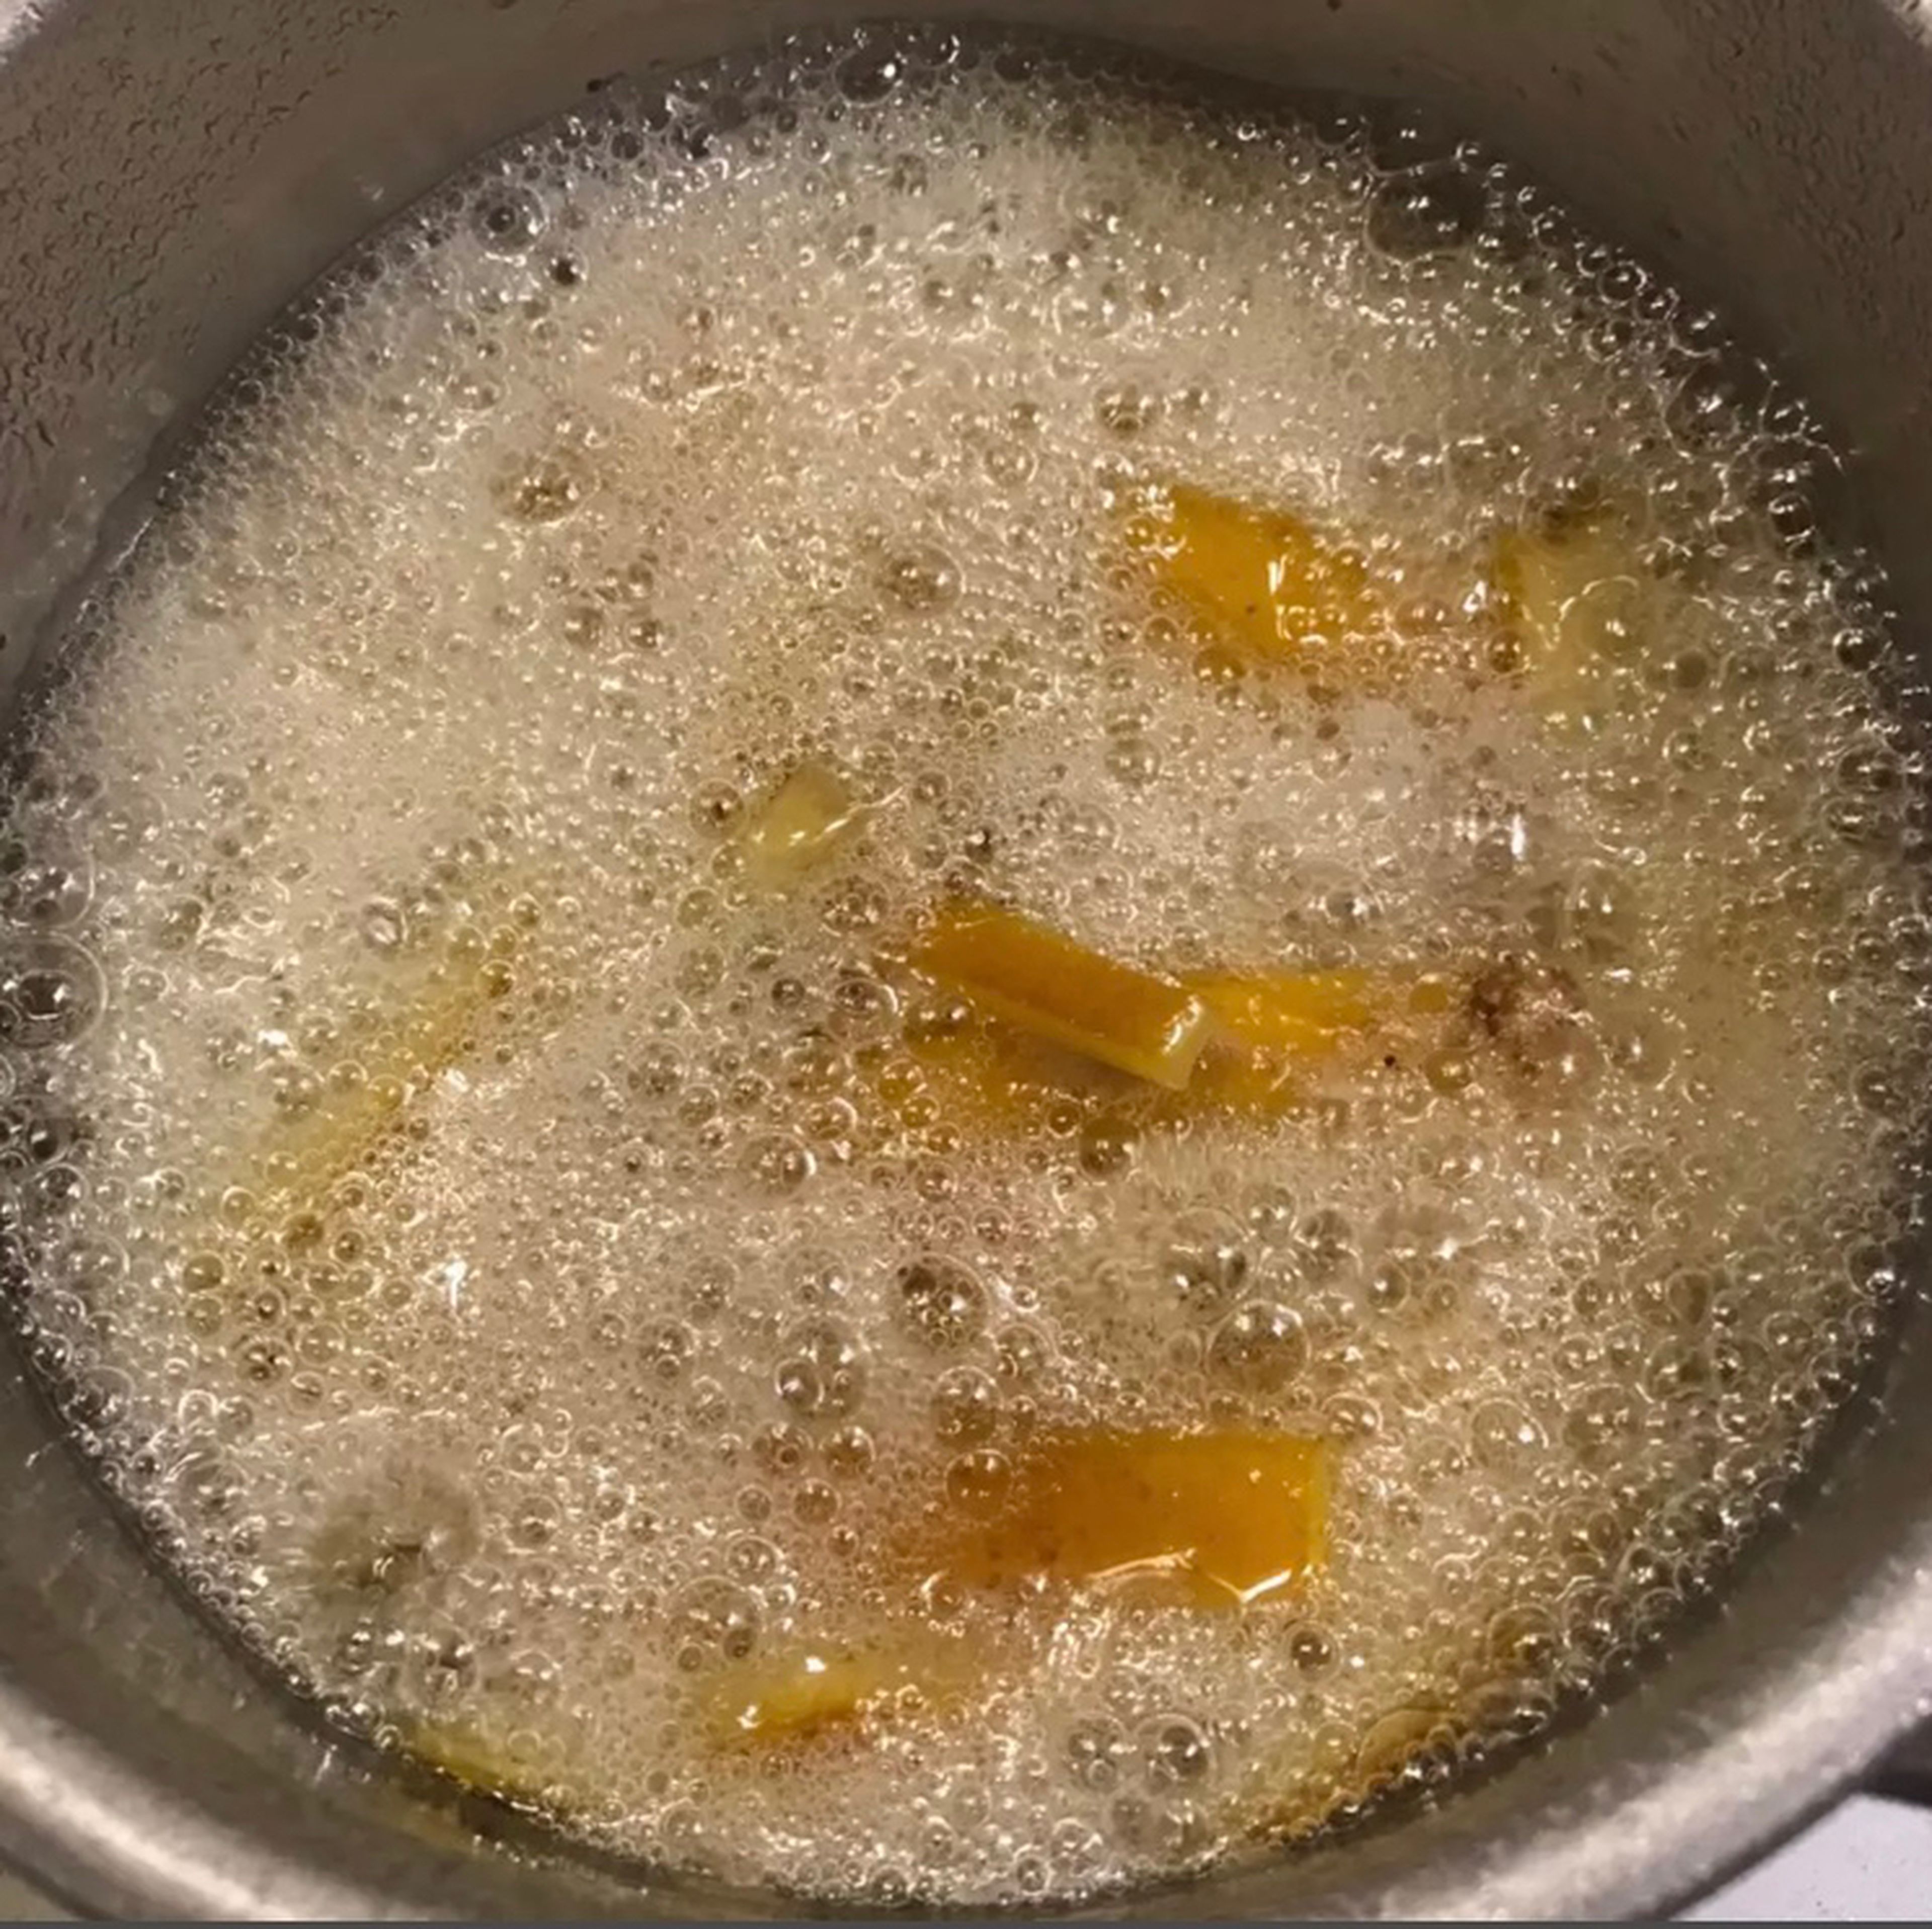 Then pour the orange peel in a saucepan and pour enough water to come side by side with the slices. Add sugar and let it cook for 45 minutes.